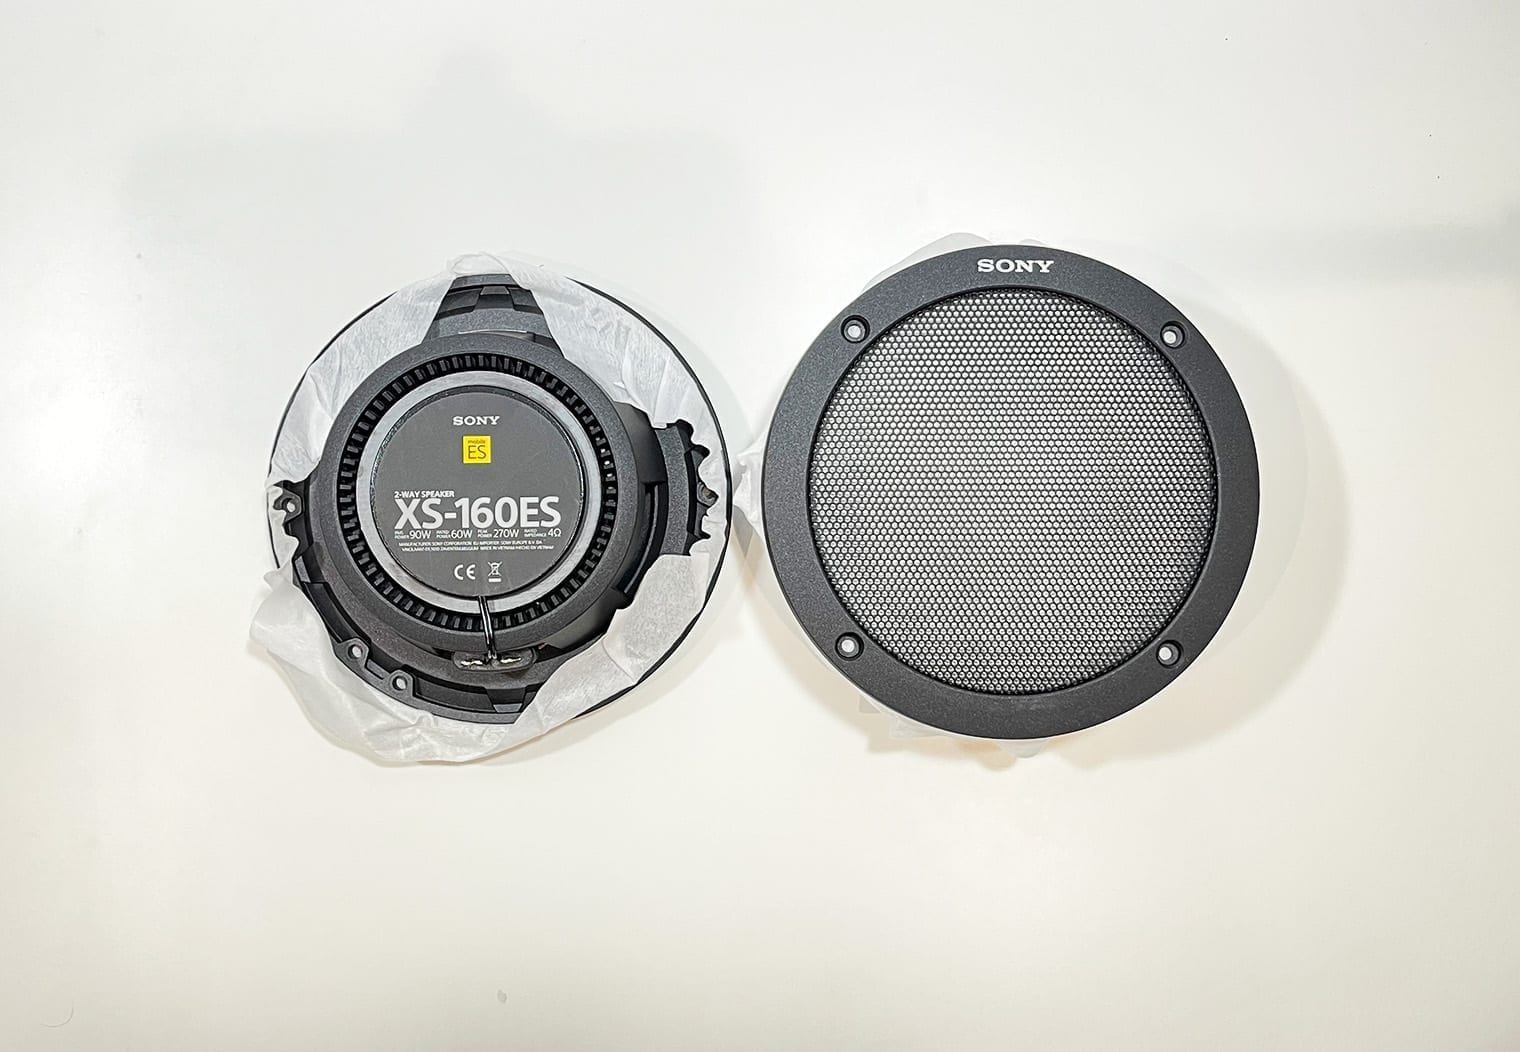 Sony XS-160ES front and back